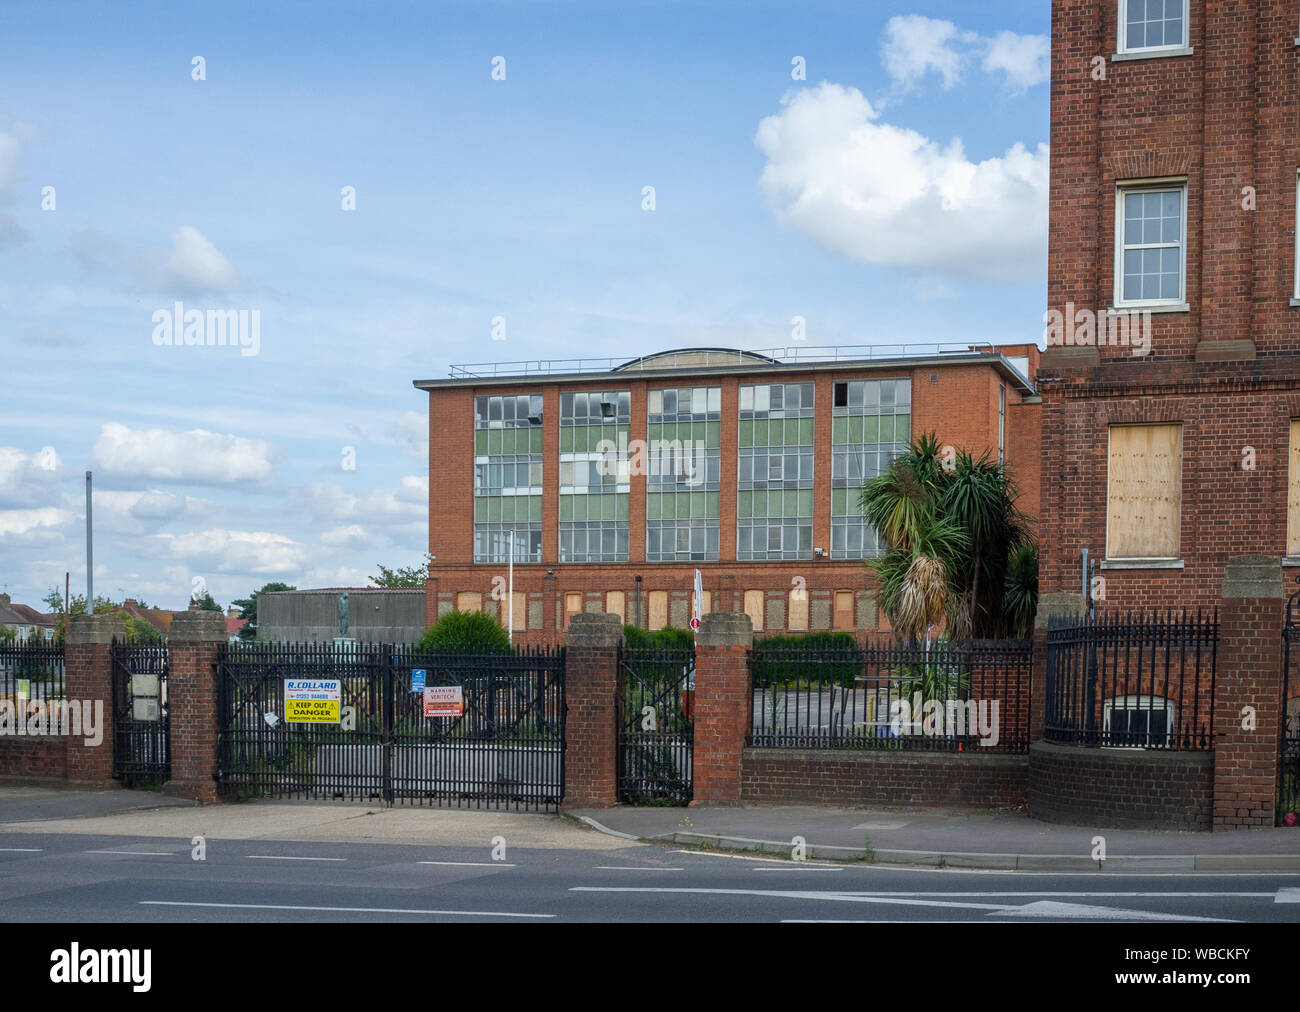 The Horlick's Factory, Slough, Berkshire, now decommissioned. This building has now been demolished, in preparation for redevelopment of the site. Stock Photo